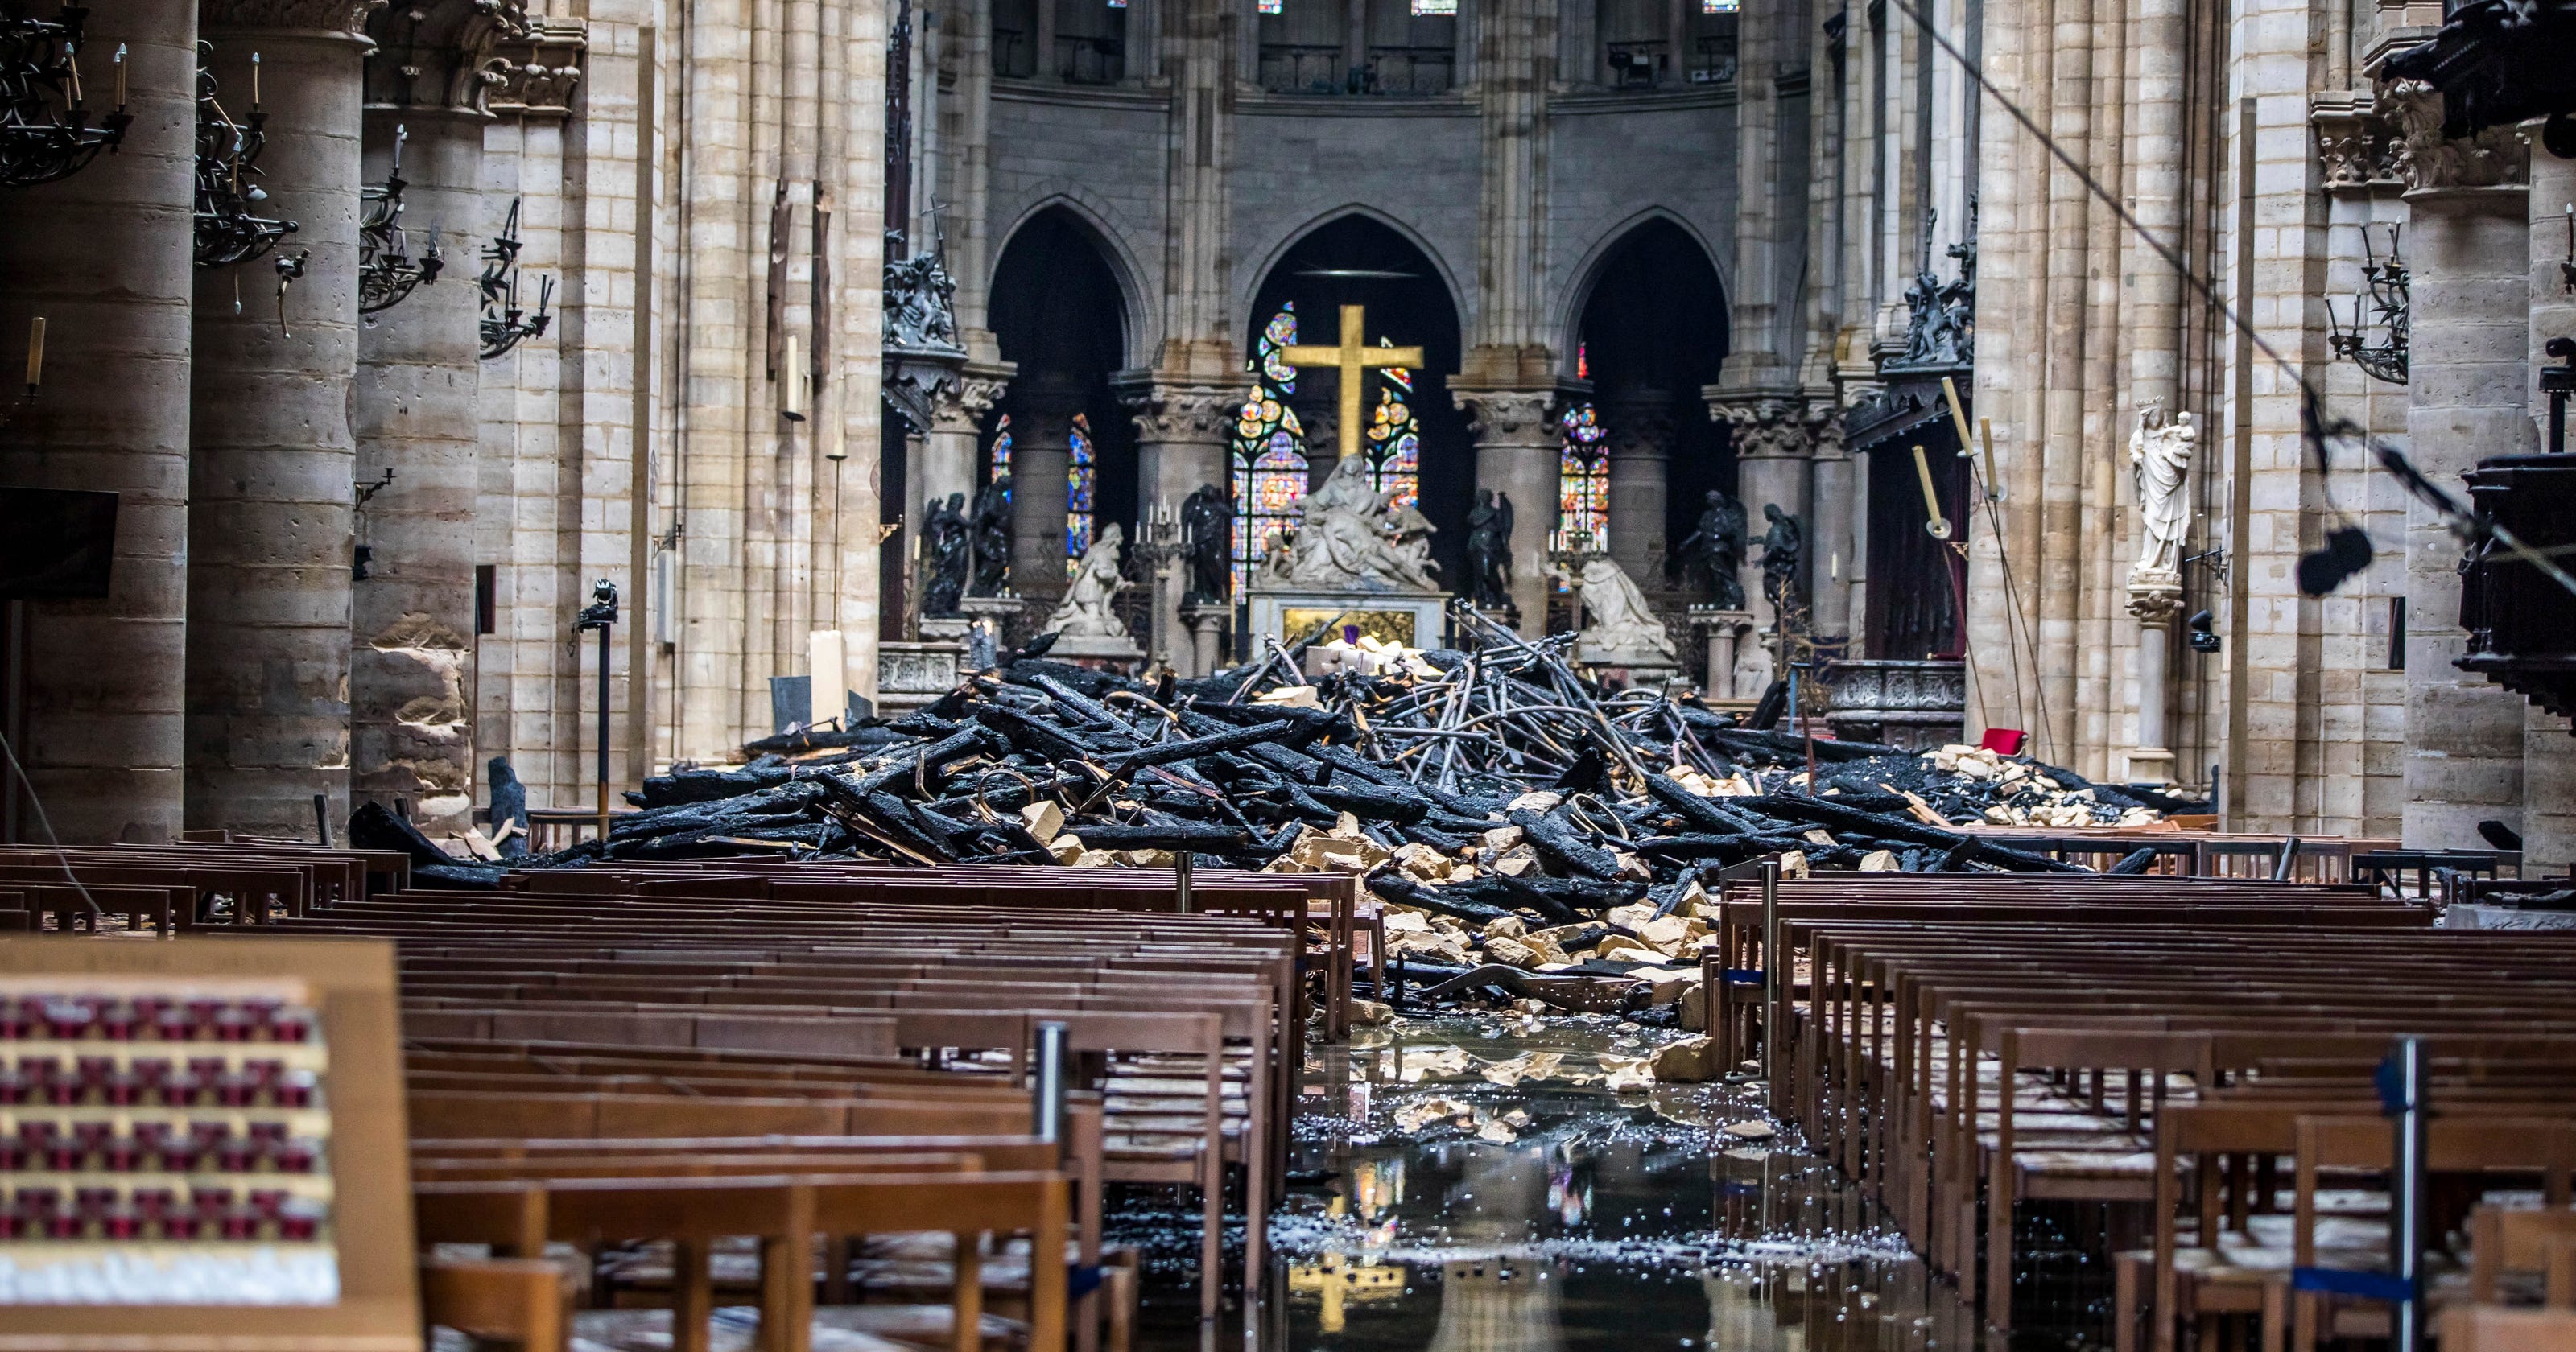 Notre Dame Cathedral fire: $1B may not cover rebuilding Paris church